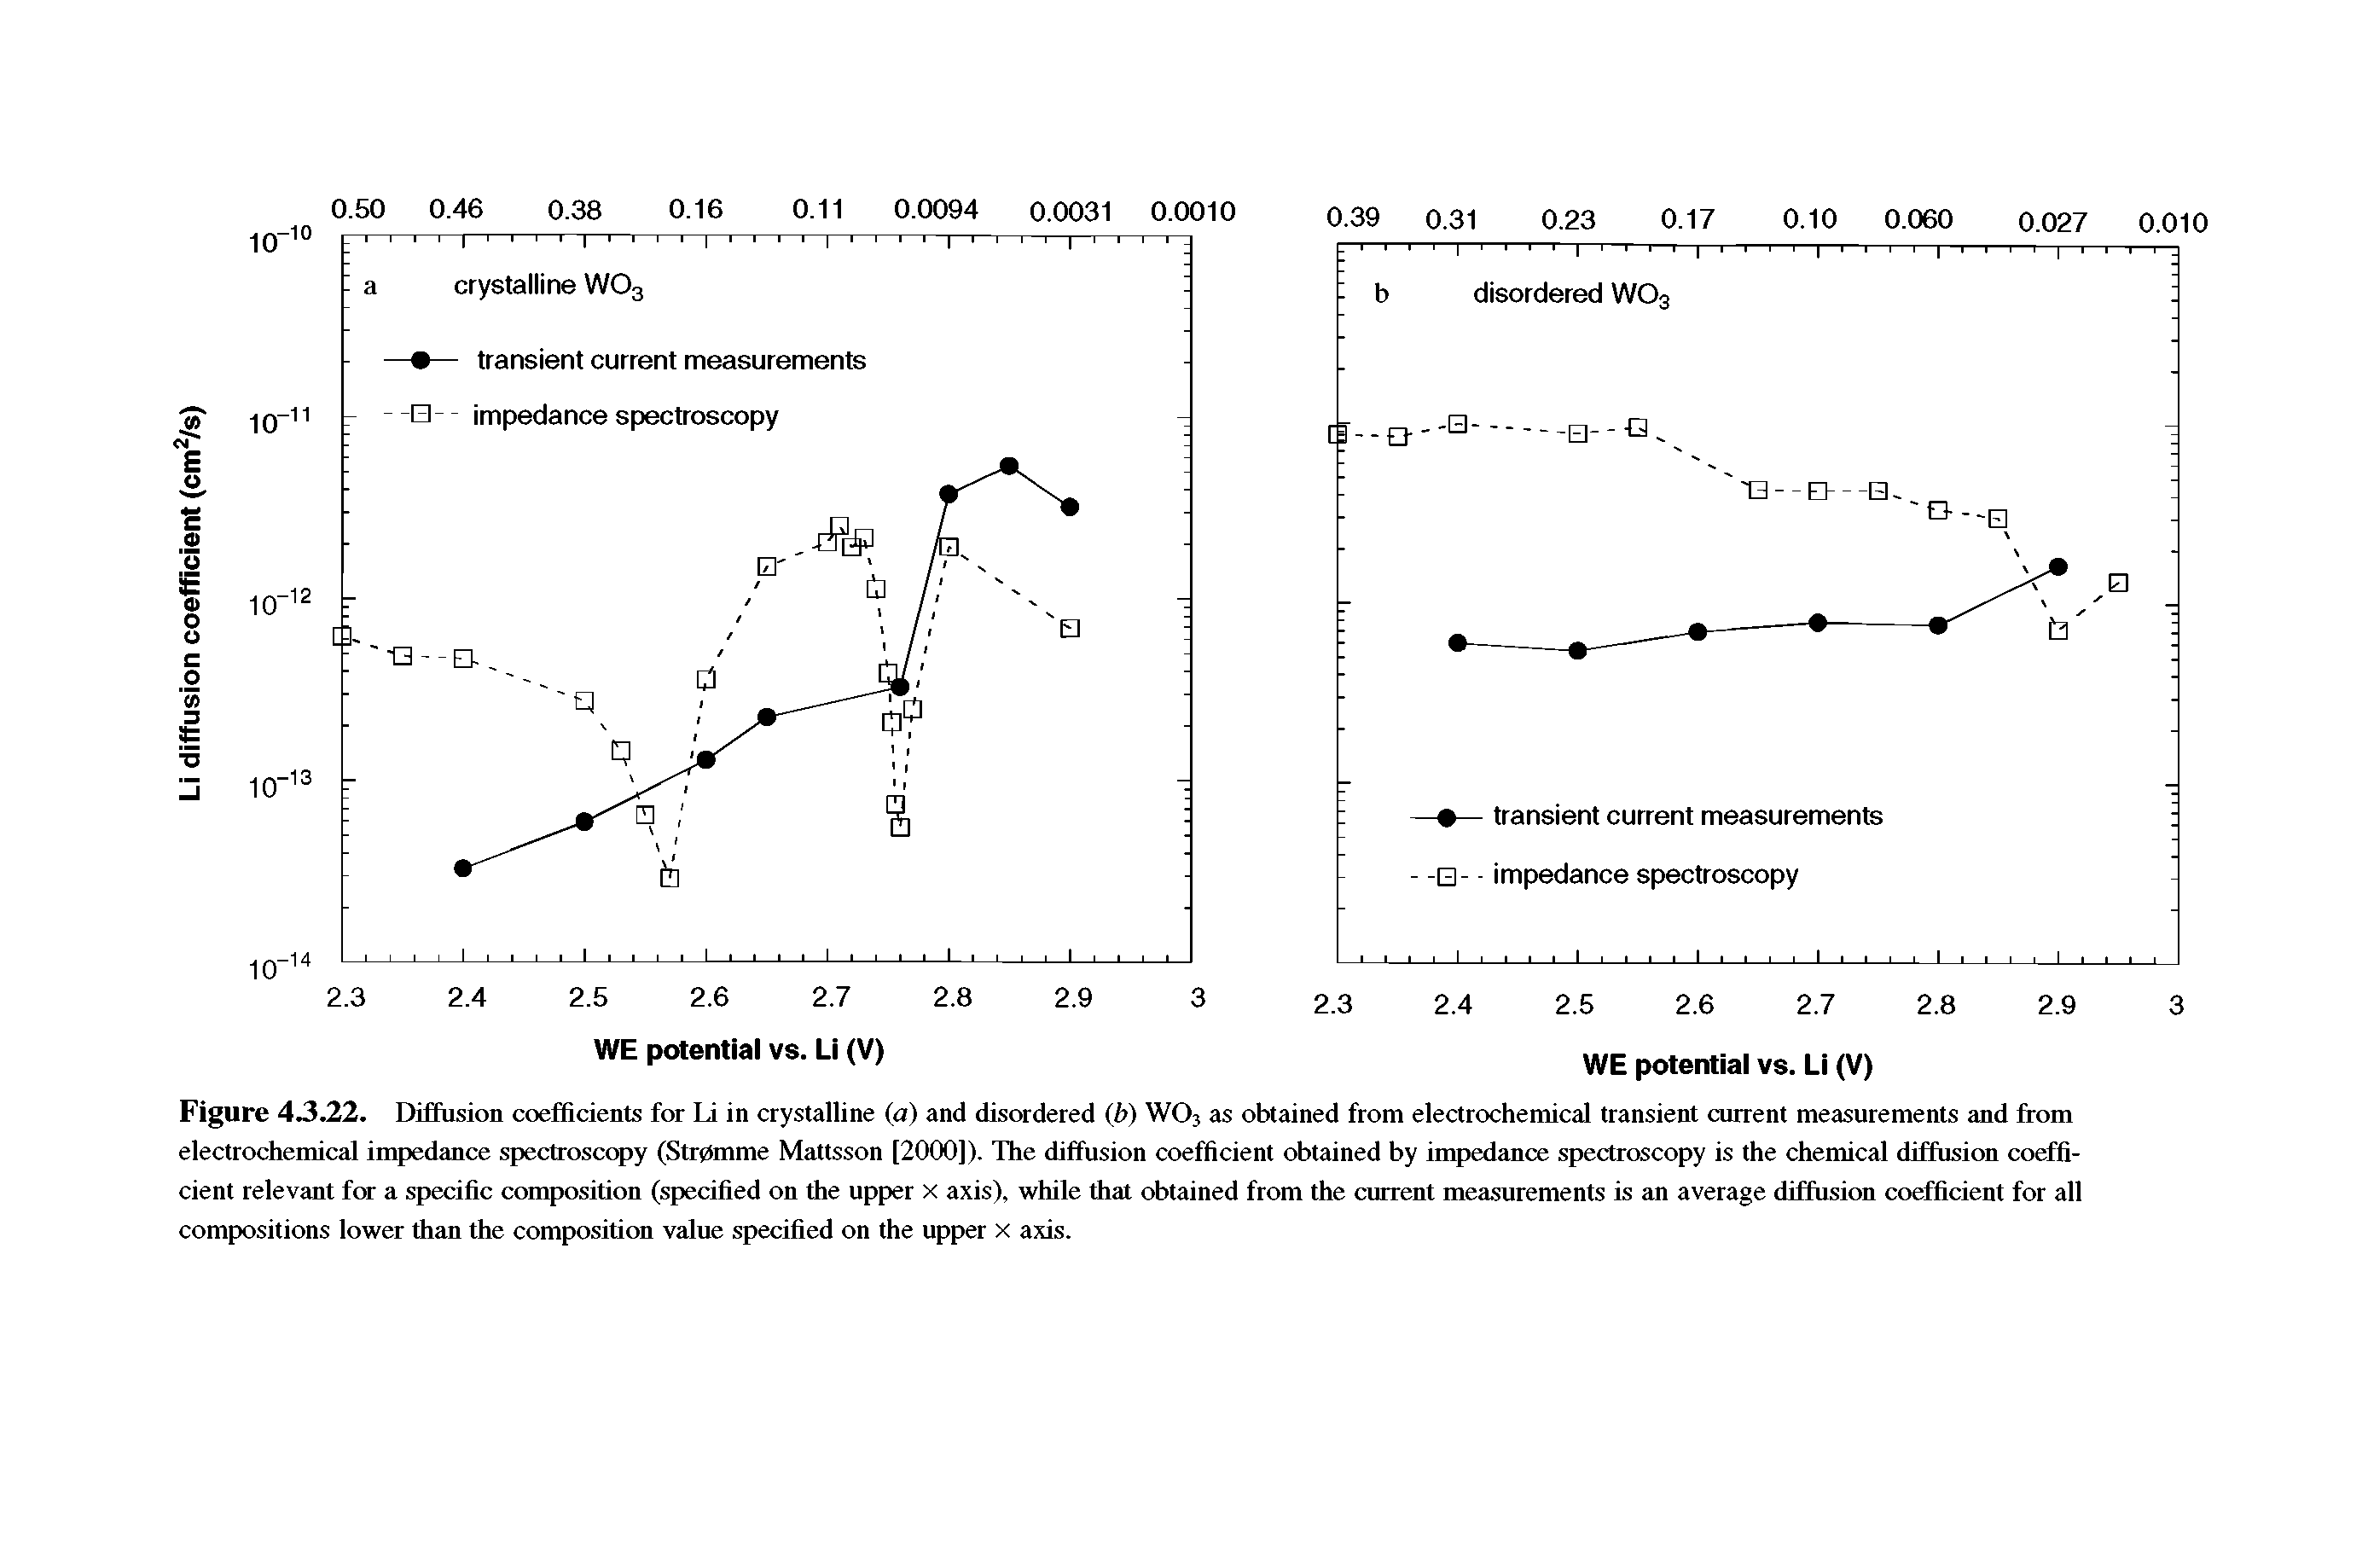 Figure 43 2. Diffusion coefficients far LA in crystalline (a) and disordered (i>) WO3 as obtained from electrochemical transient current measurements and from electrochemical impedance spectroscopy (Strpmme Mattsson [2000]). The diffusion coefficient obtained by impedance spectroscopy is the chemical diffusion coefficient relevant for a specific composition (specified on the upper x axis), while that obtained from the current measurements is an average diffusion coefficient for all compositions lower than the composition value specified on the upper x axis.